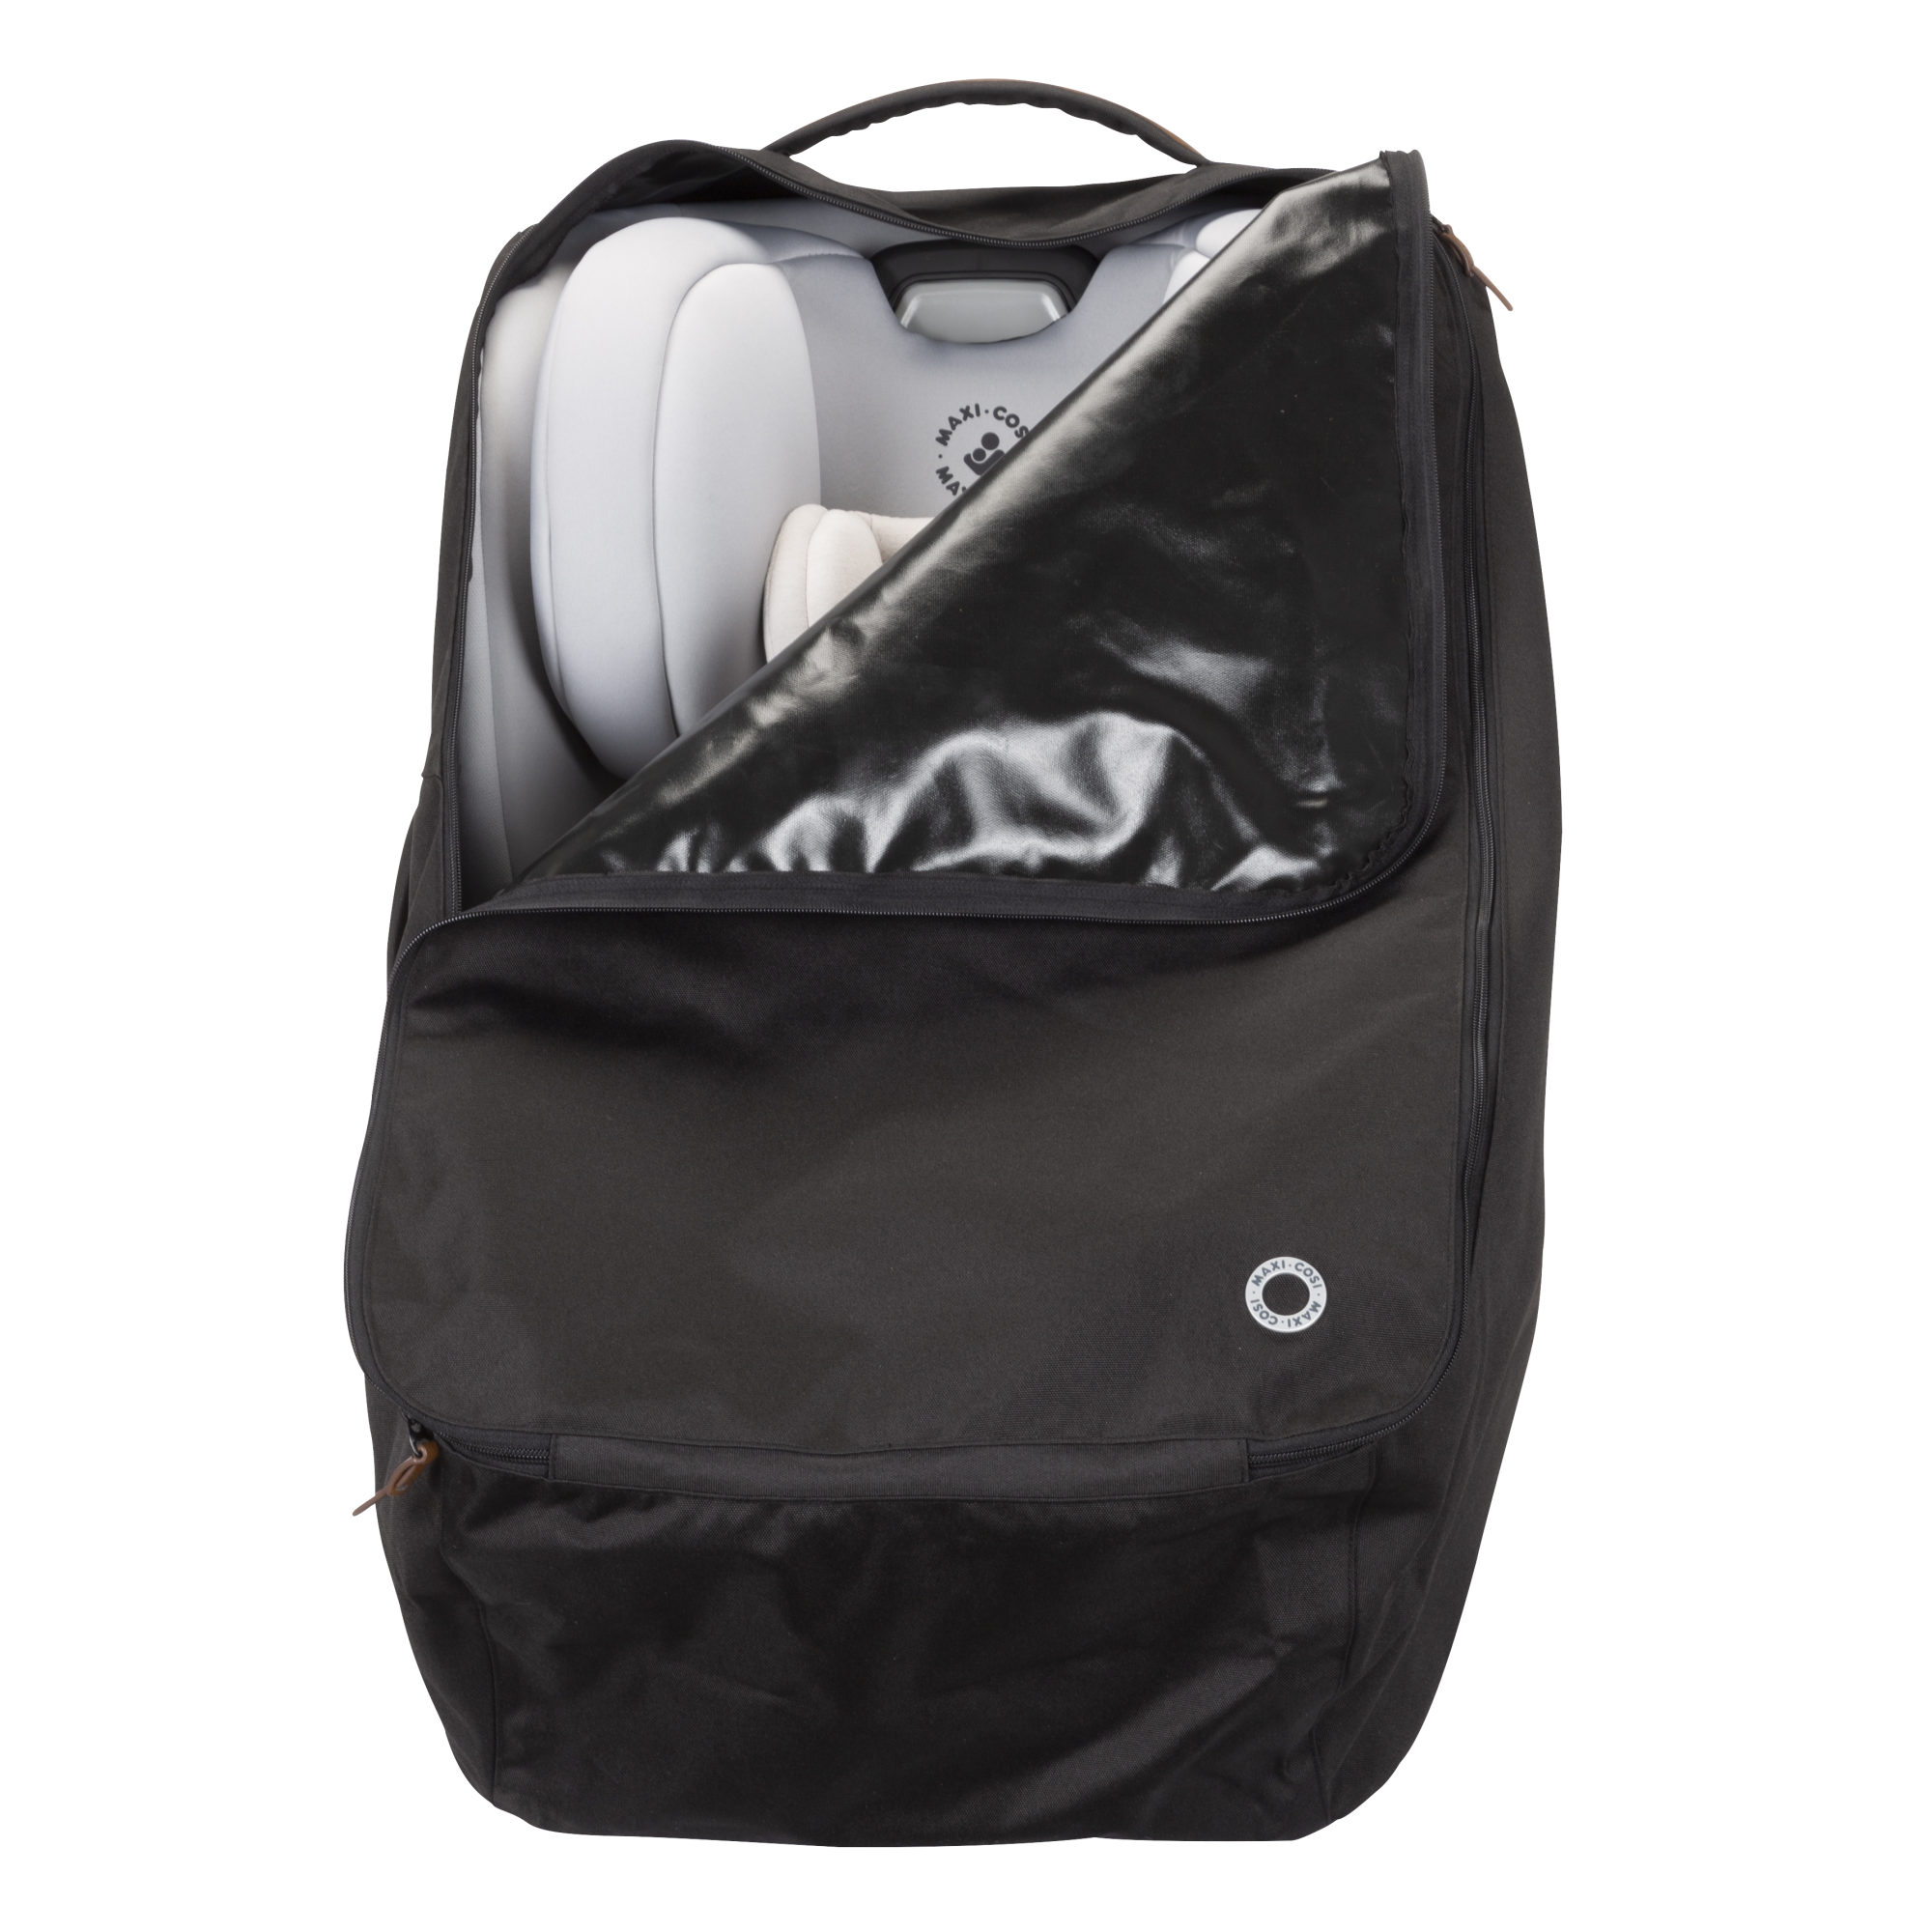 Wheeled Car Seat Travel Pack - open bag reveals car seat within